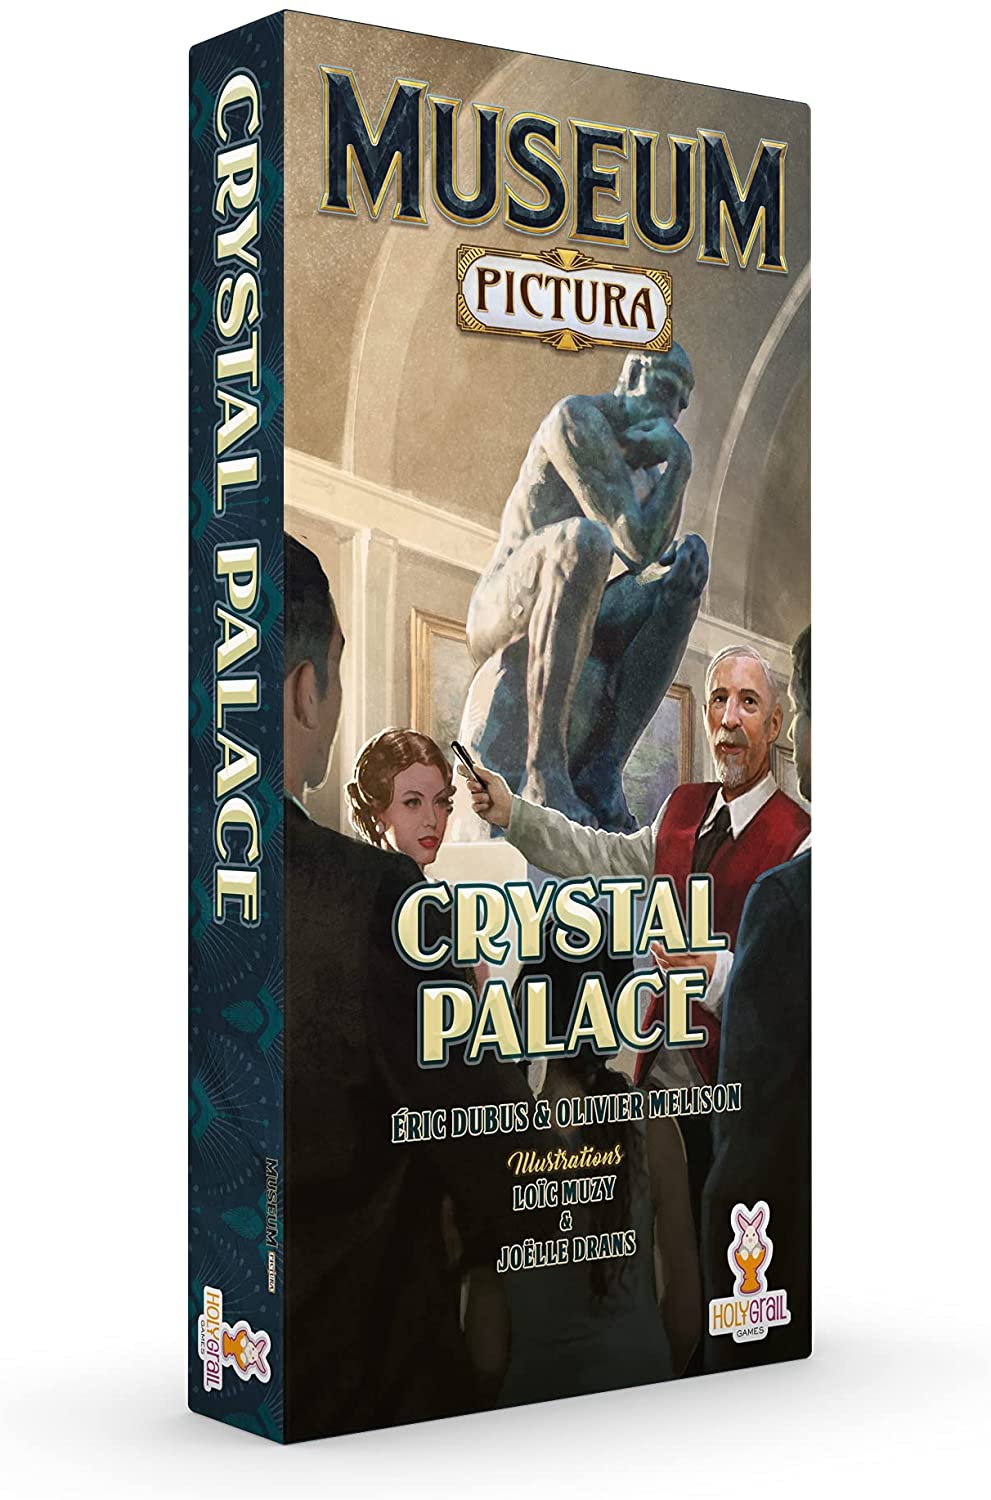 Museum: Pictura - Crystal Palace - Third Eye